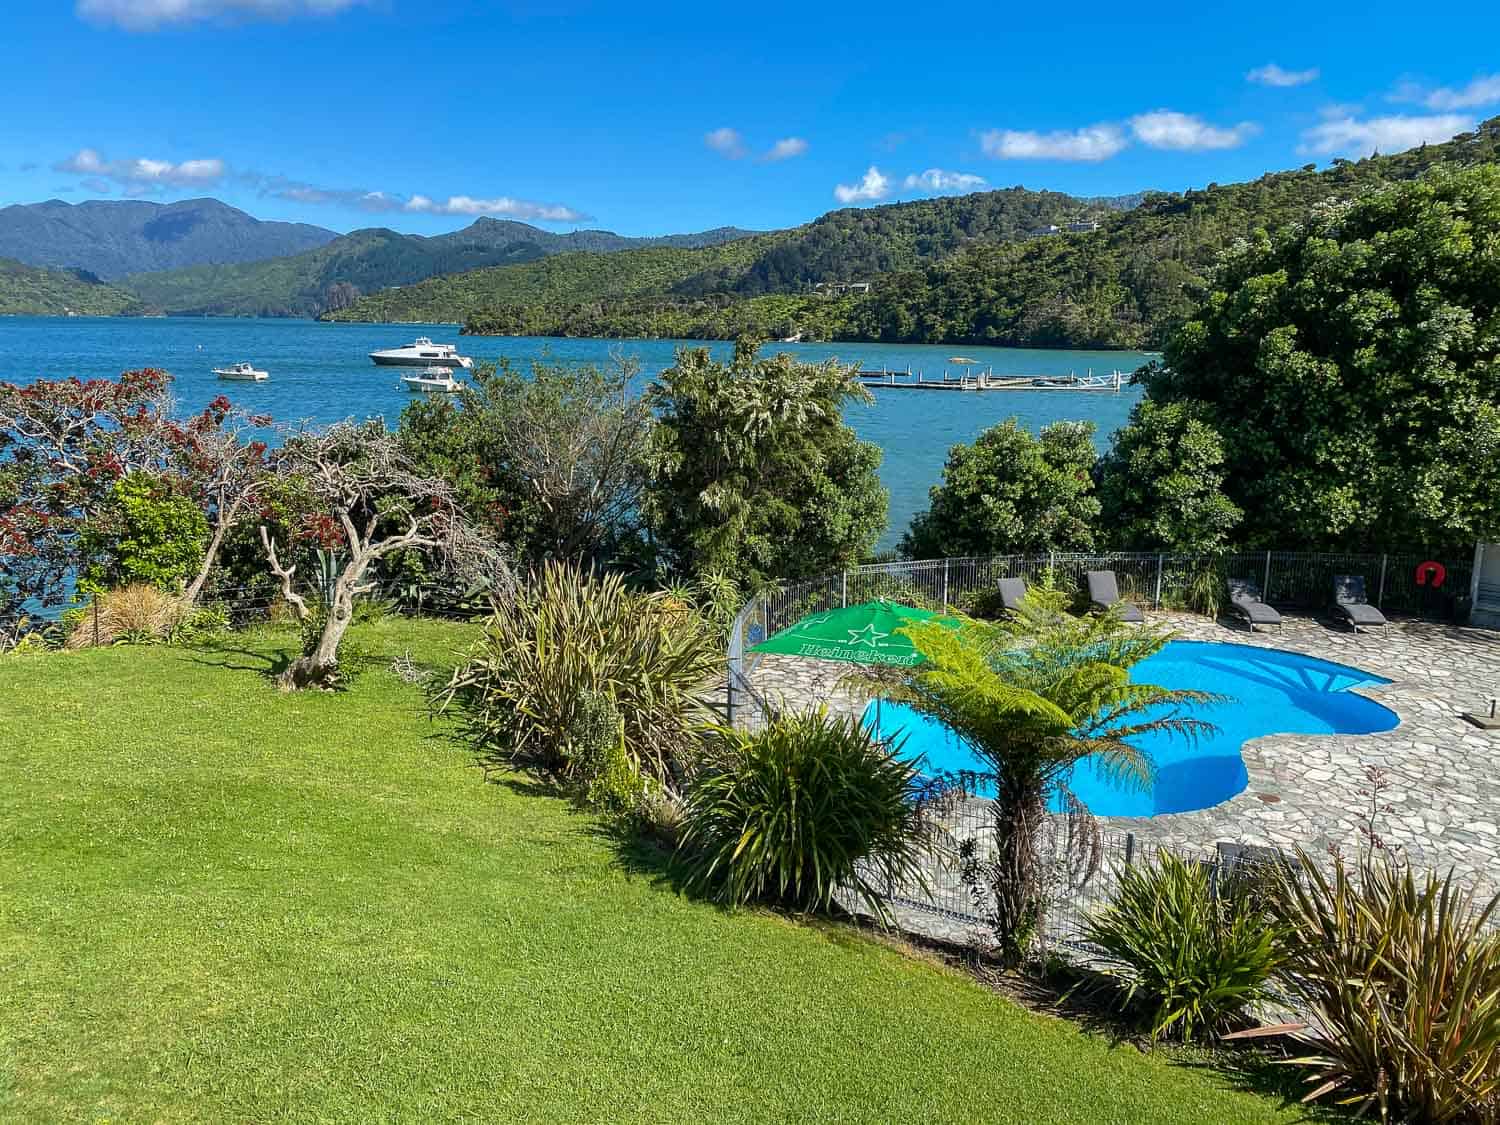 Pool at Portage Hotel on the Queen Charlotte Track, New Zealand